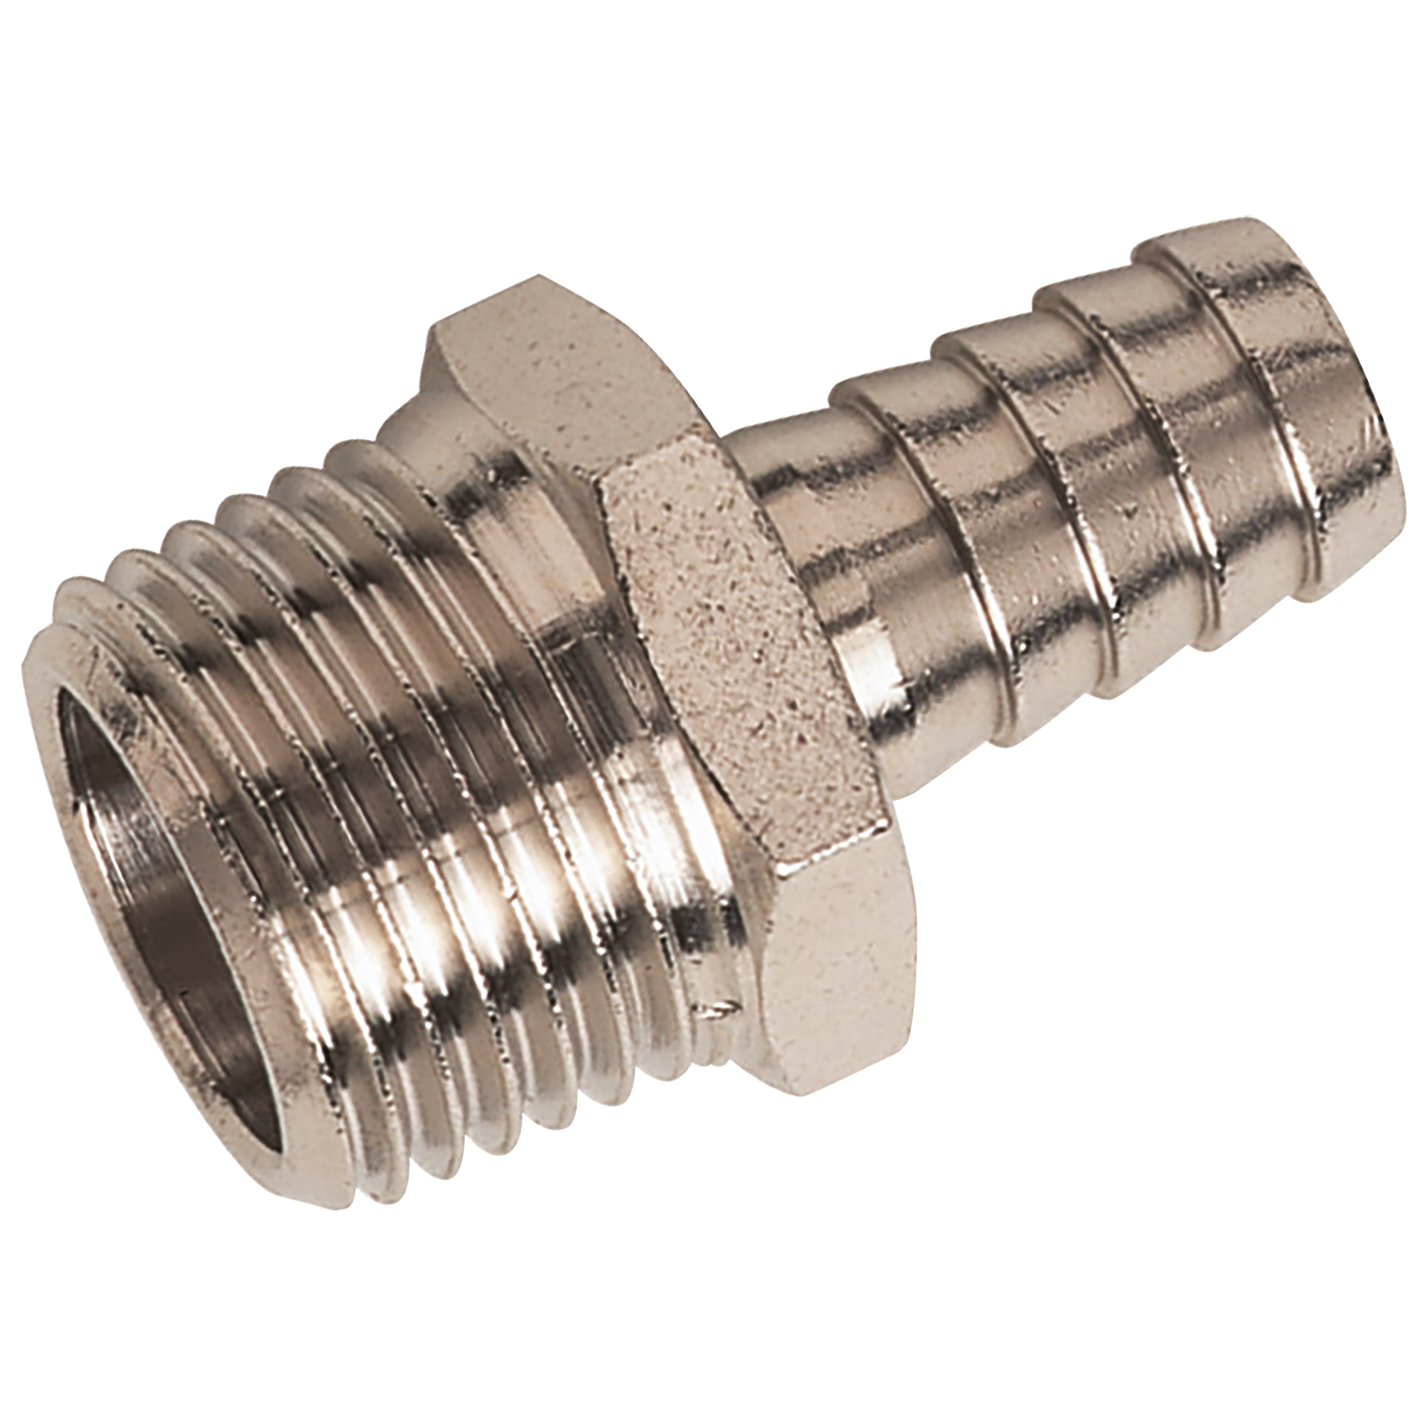 3/4" BSPT Male Straight Hose Tails, Nickel Plated Brass